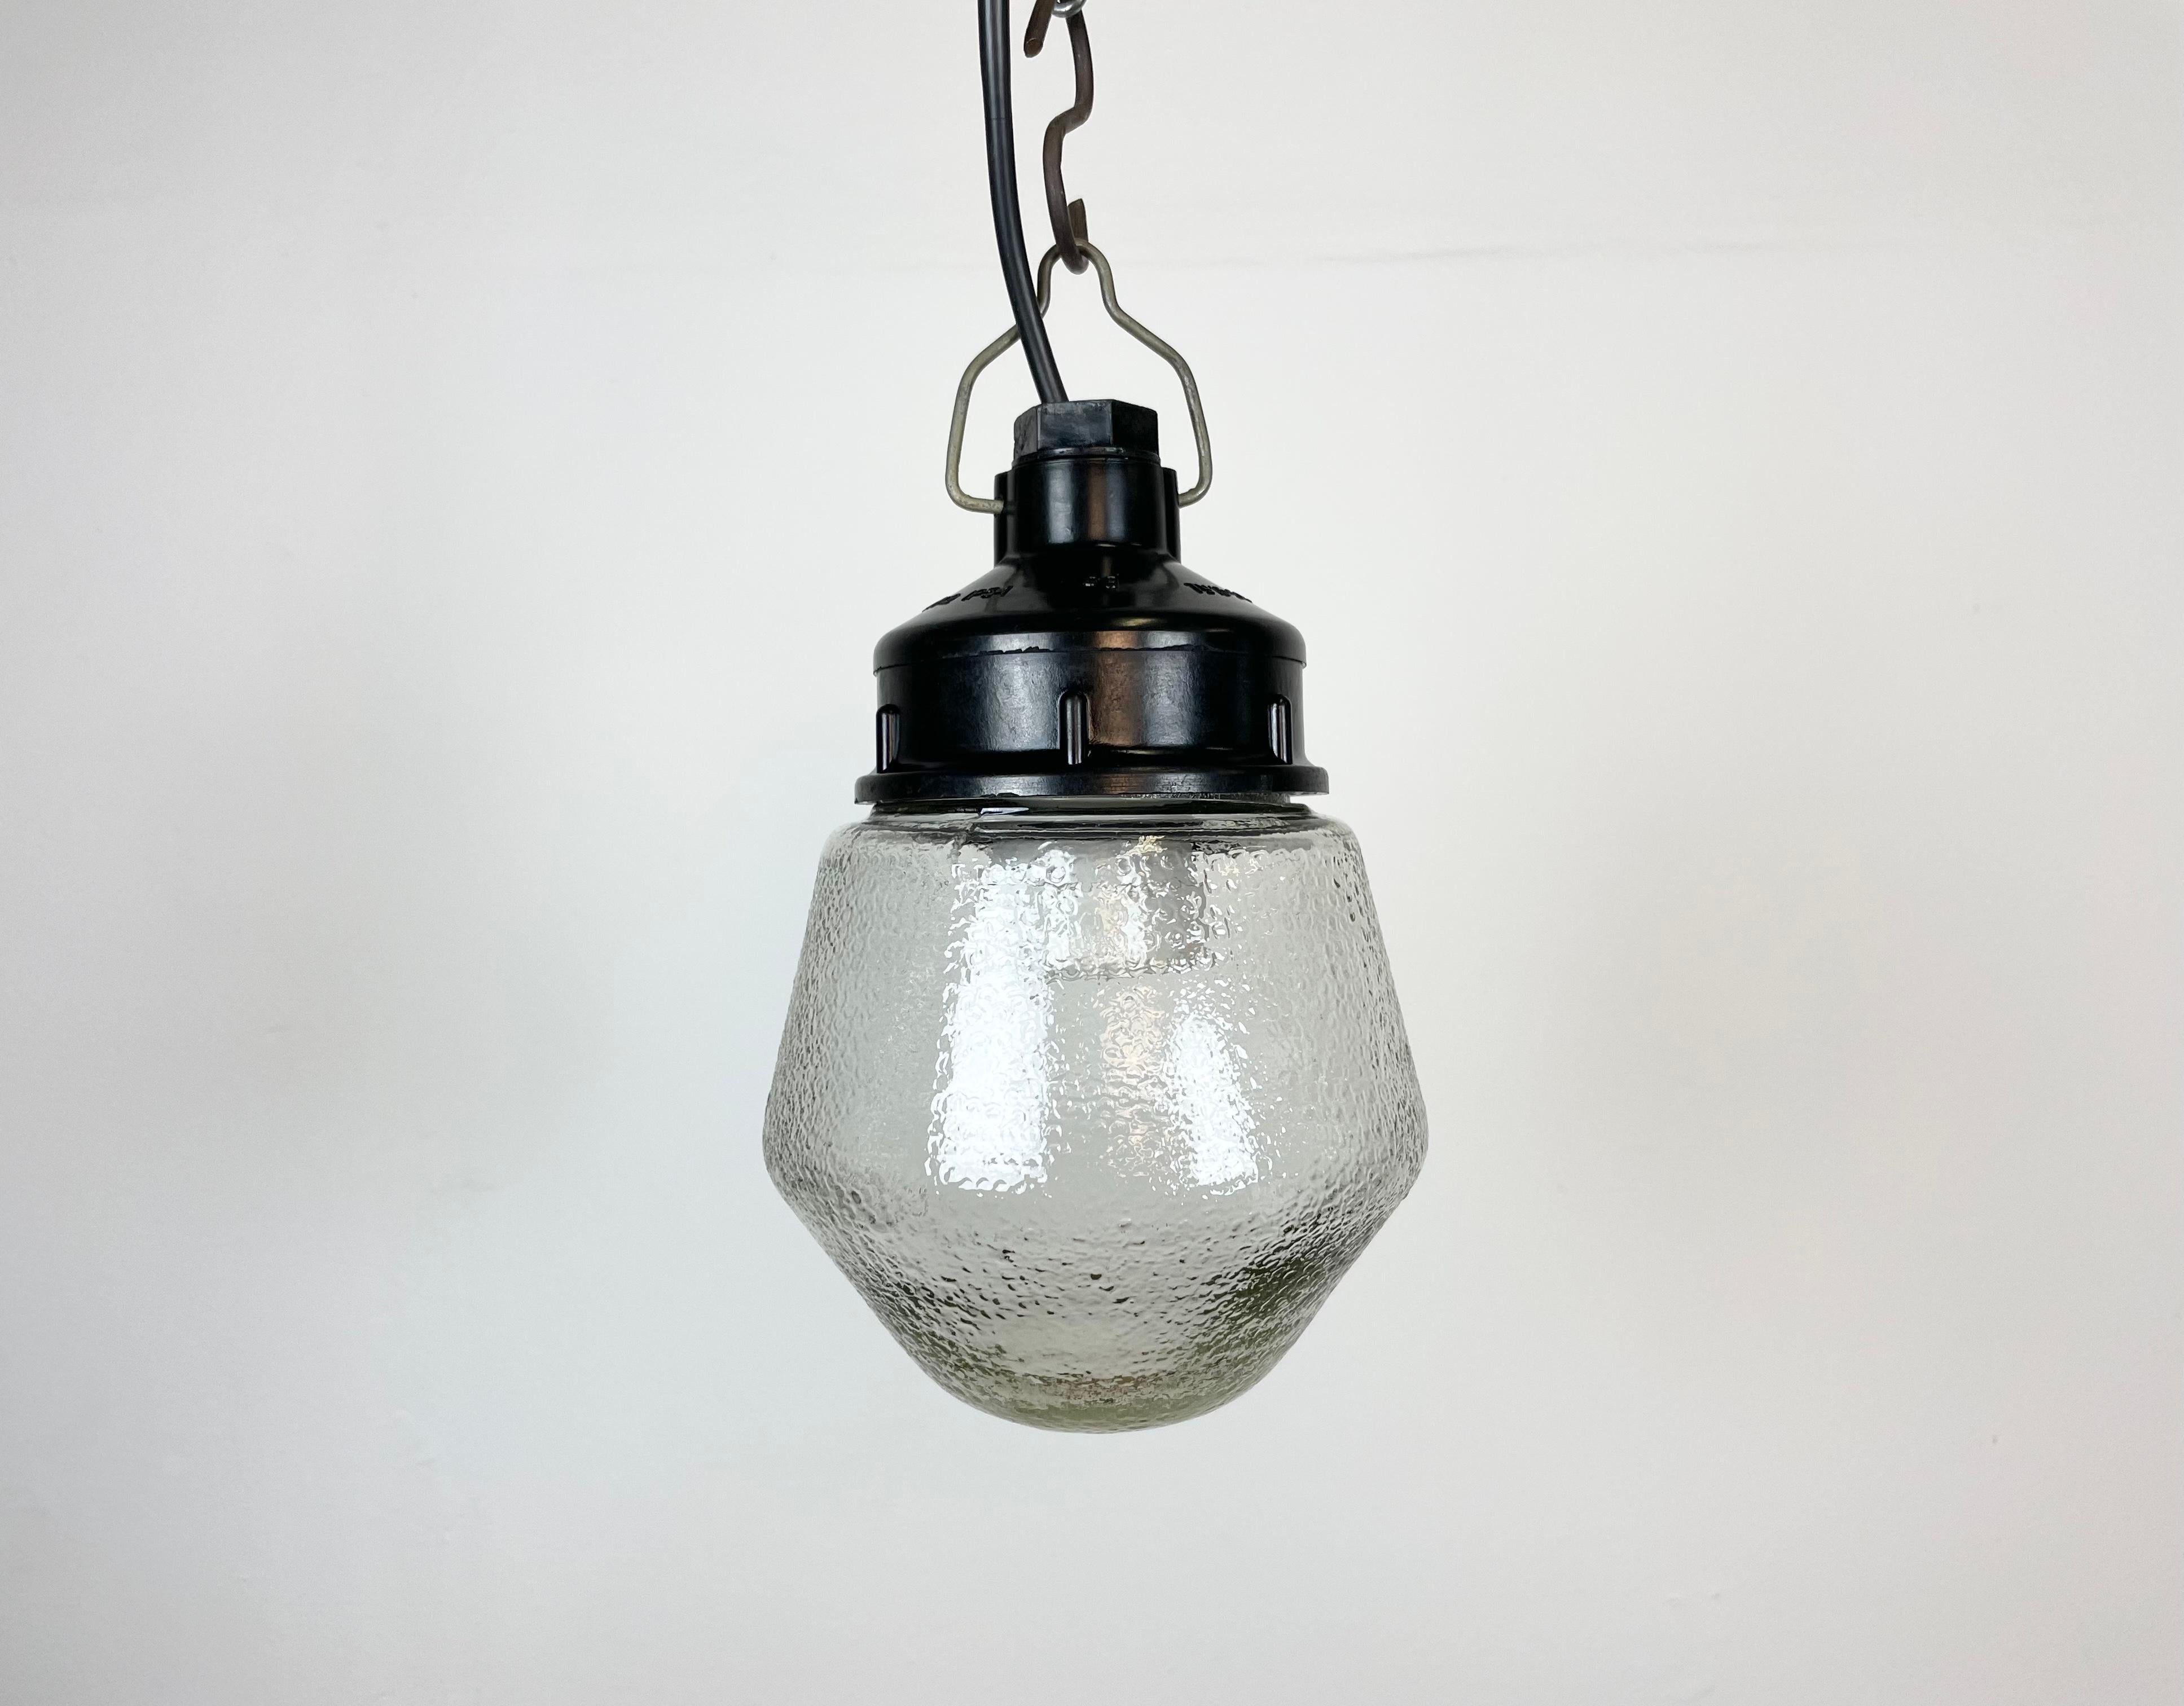 Vintage industrial light made in former Soviet Union during the 1970s. It features a brown bakelite top and a frosted glass cover. The socket requires E27 light bulbs. New wire. The weight of the lamp is 0,9 kg.